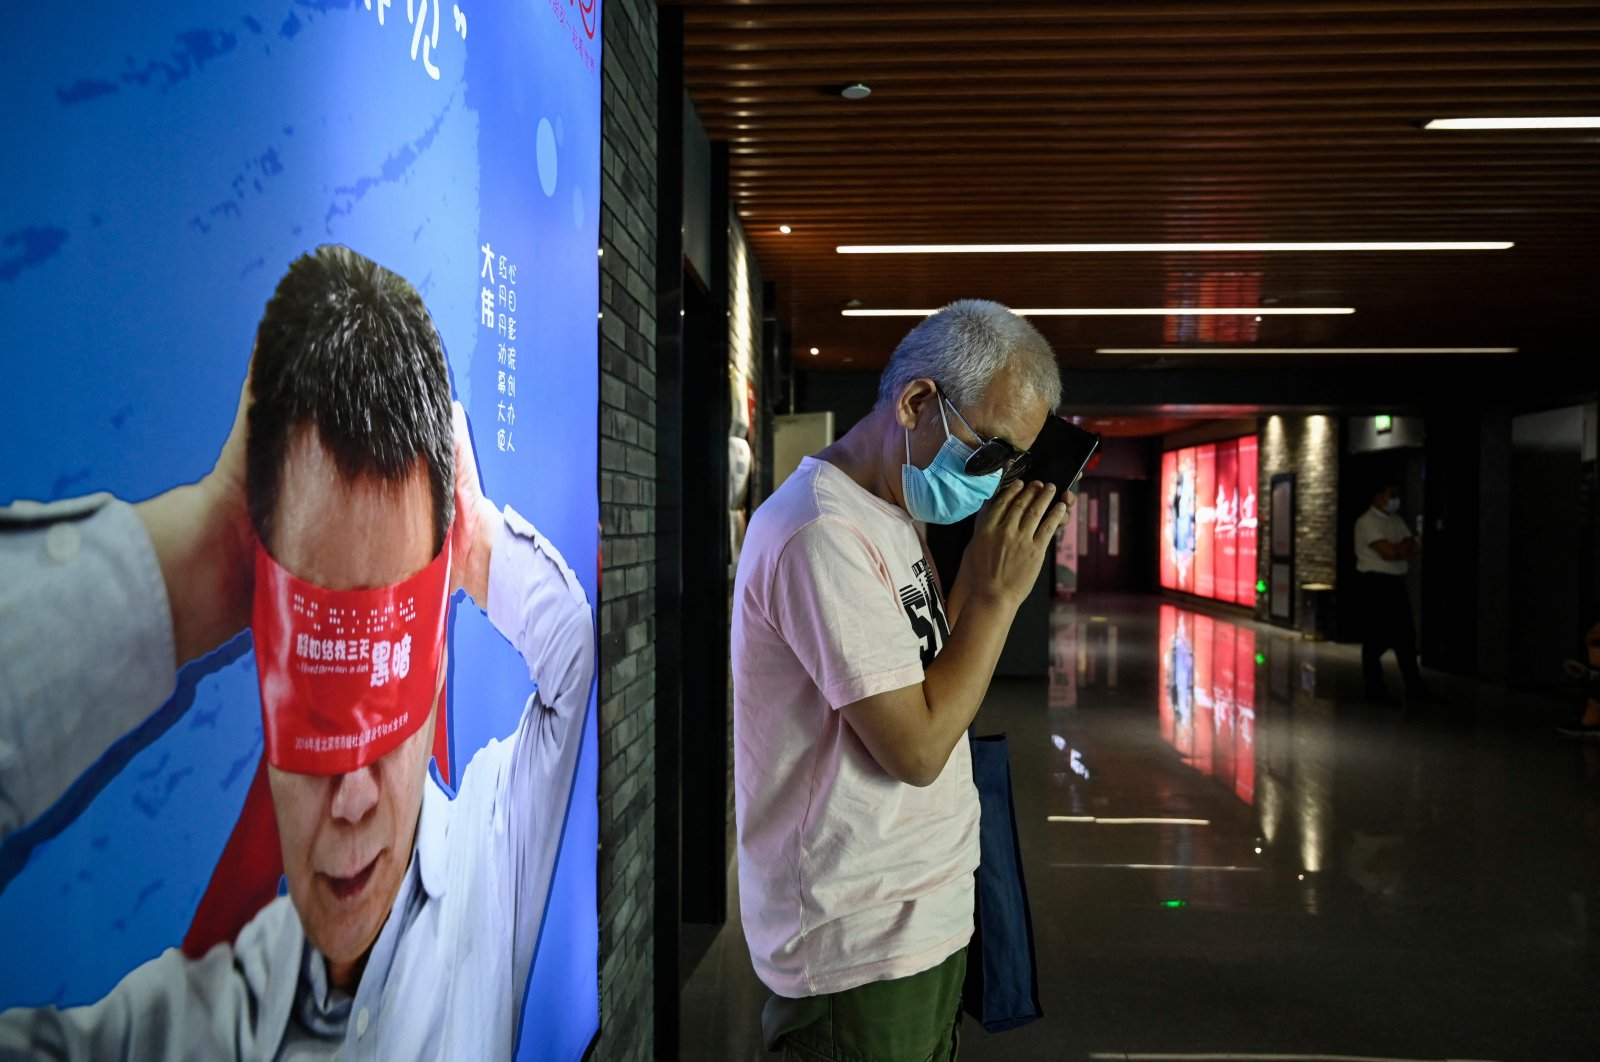 Visually impaired massage therapist Zhang Xinsheng uses his phone in front of a billboard supporting visually impaired people, at a cinema in Beijing, China, Aug. 7, 2021. (AFP Photo)